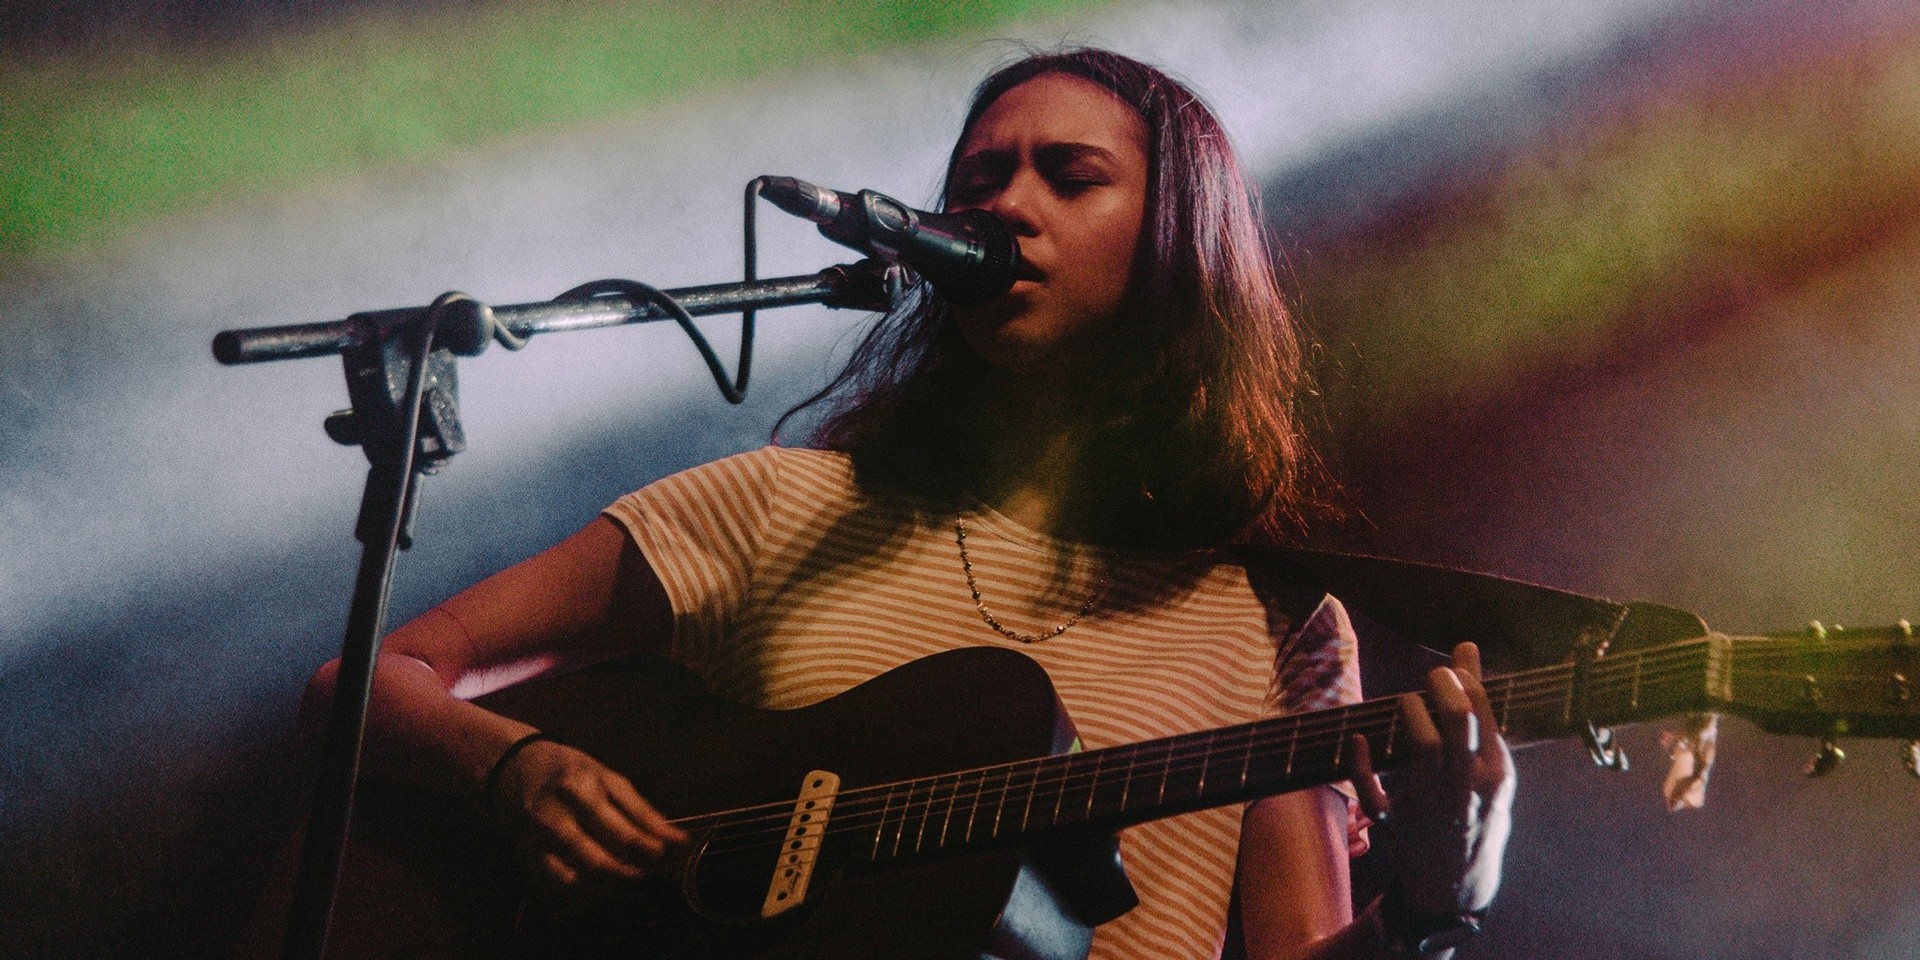 Clara Benin surprises fans with stripped down performance – watch